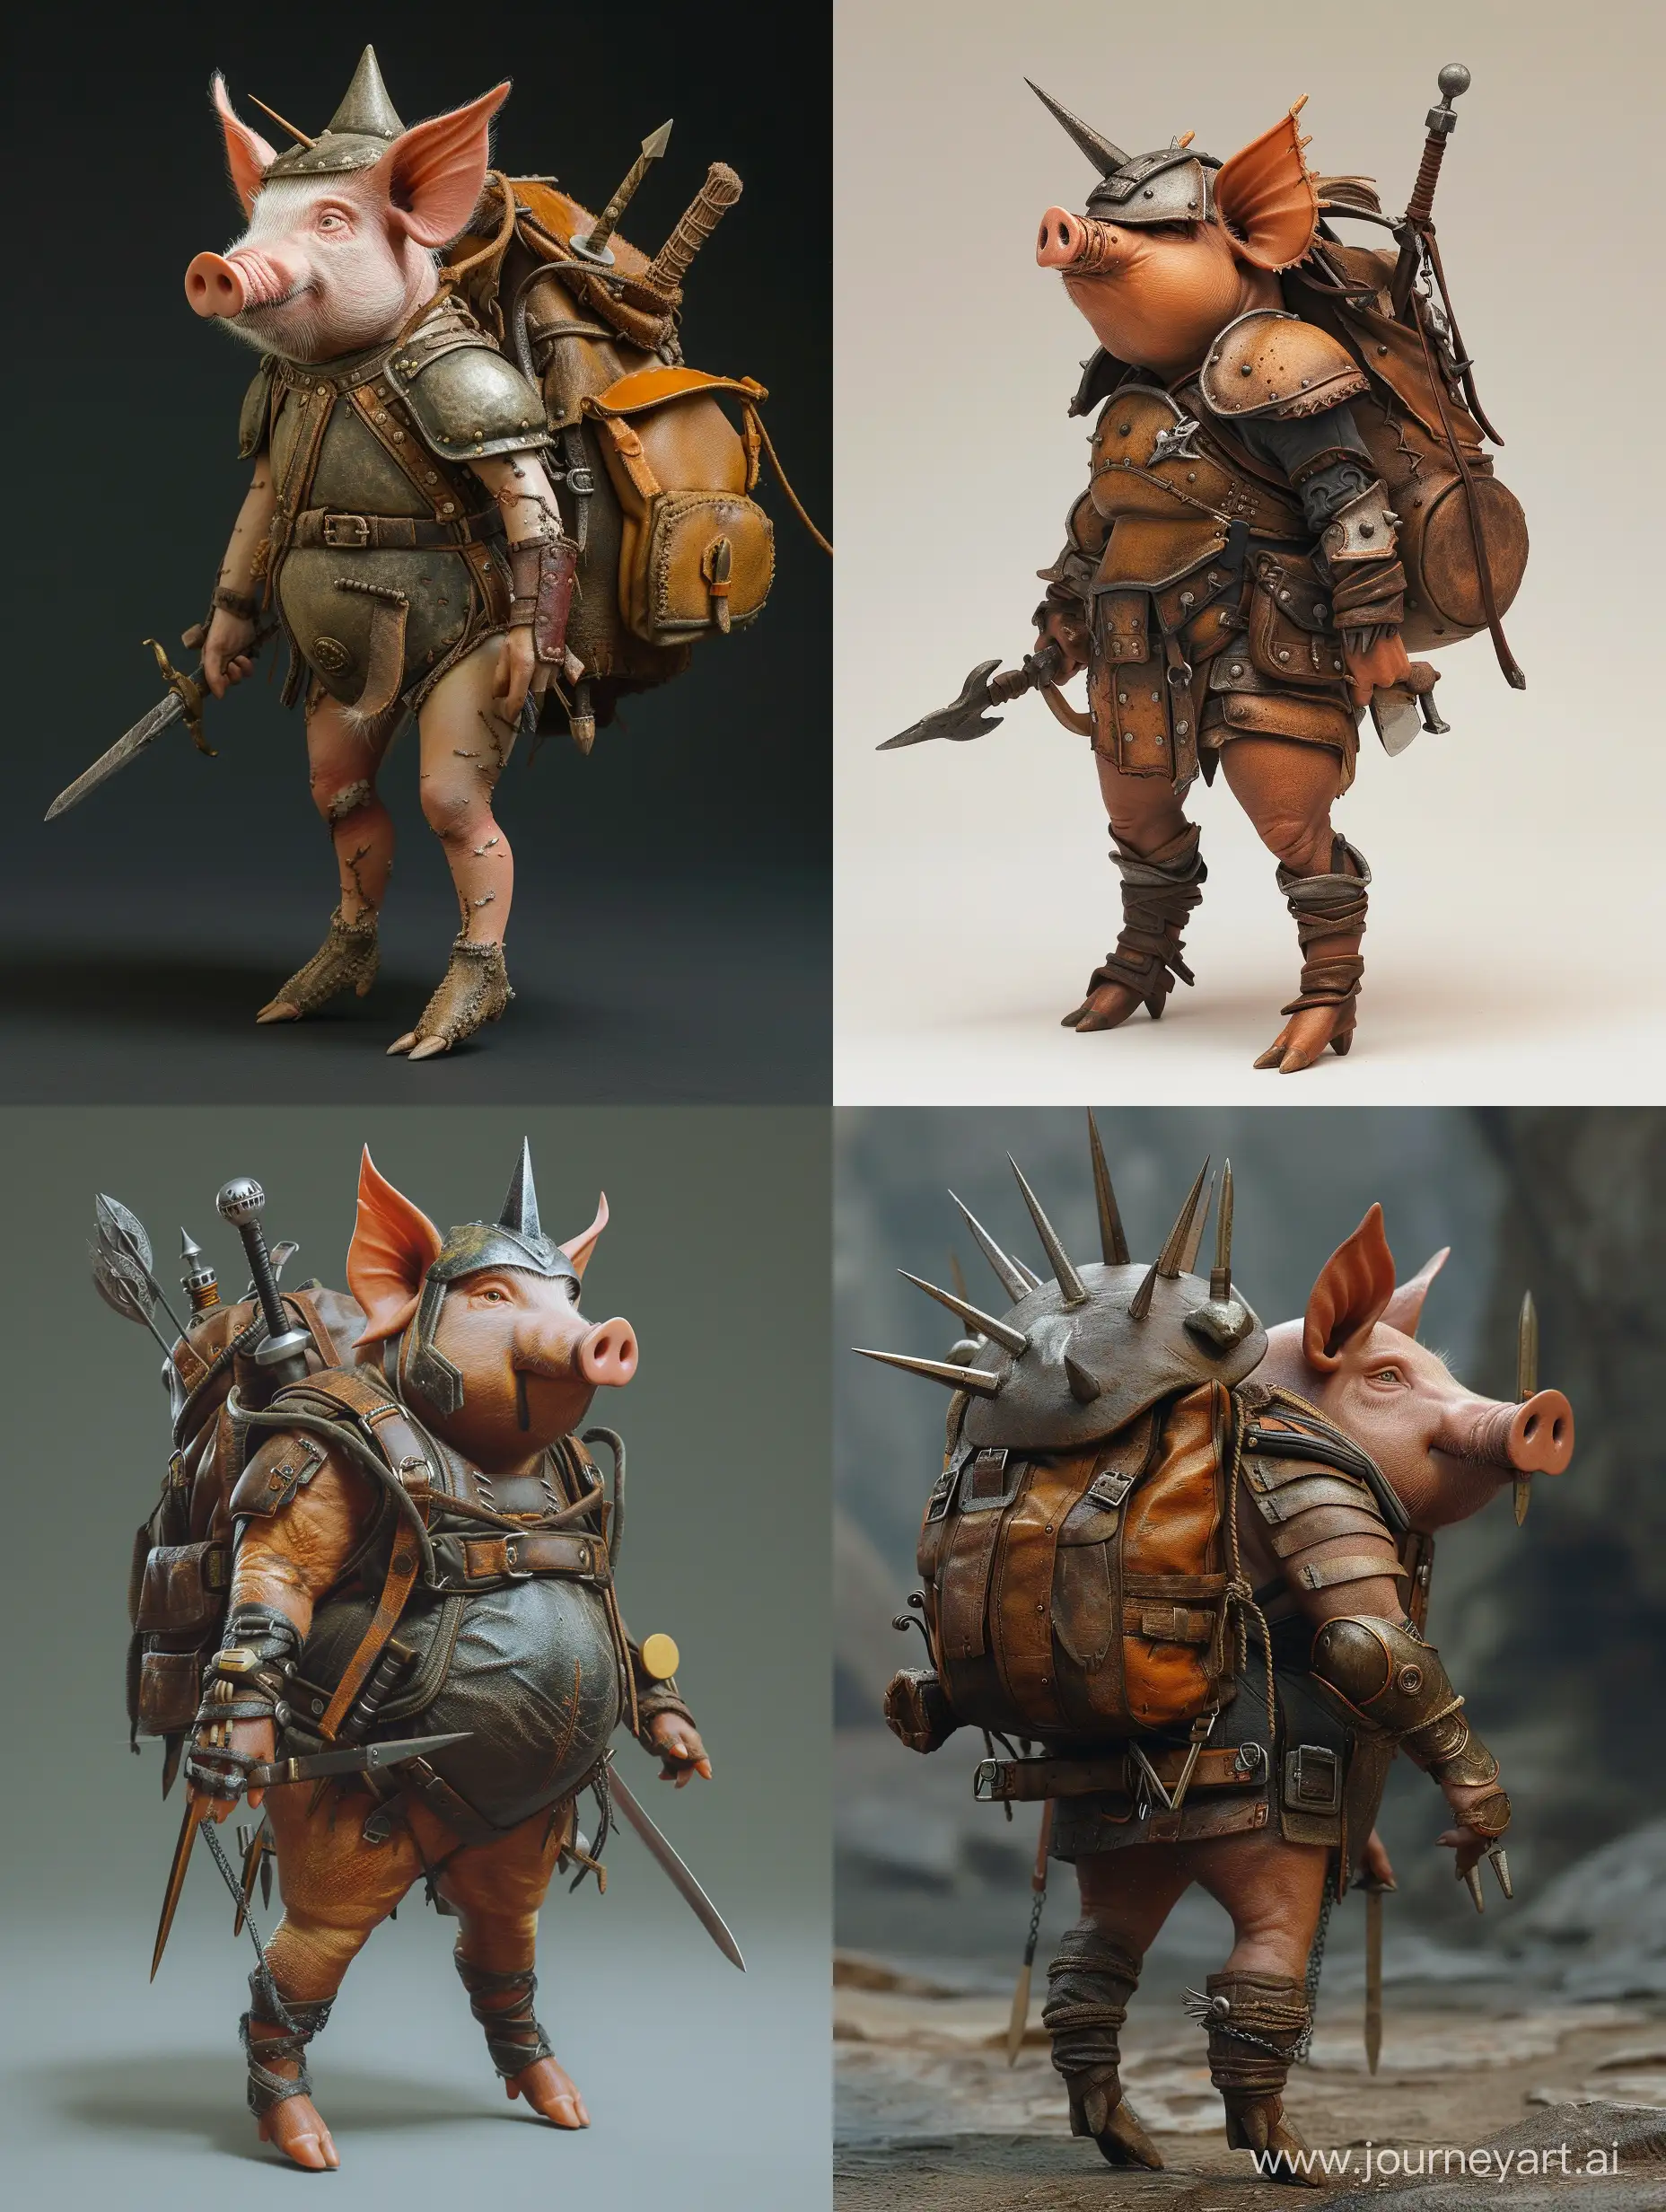 Adventurous-Pig-Warrior-in-Leather-Armor-and-Helmet-with-Spikes